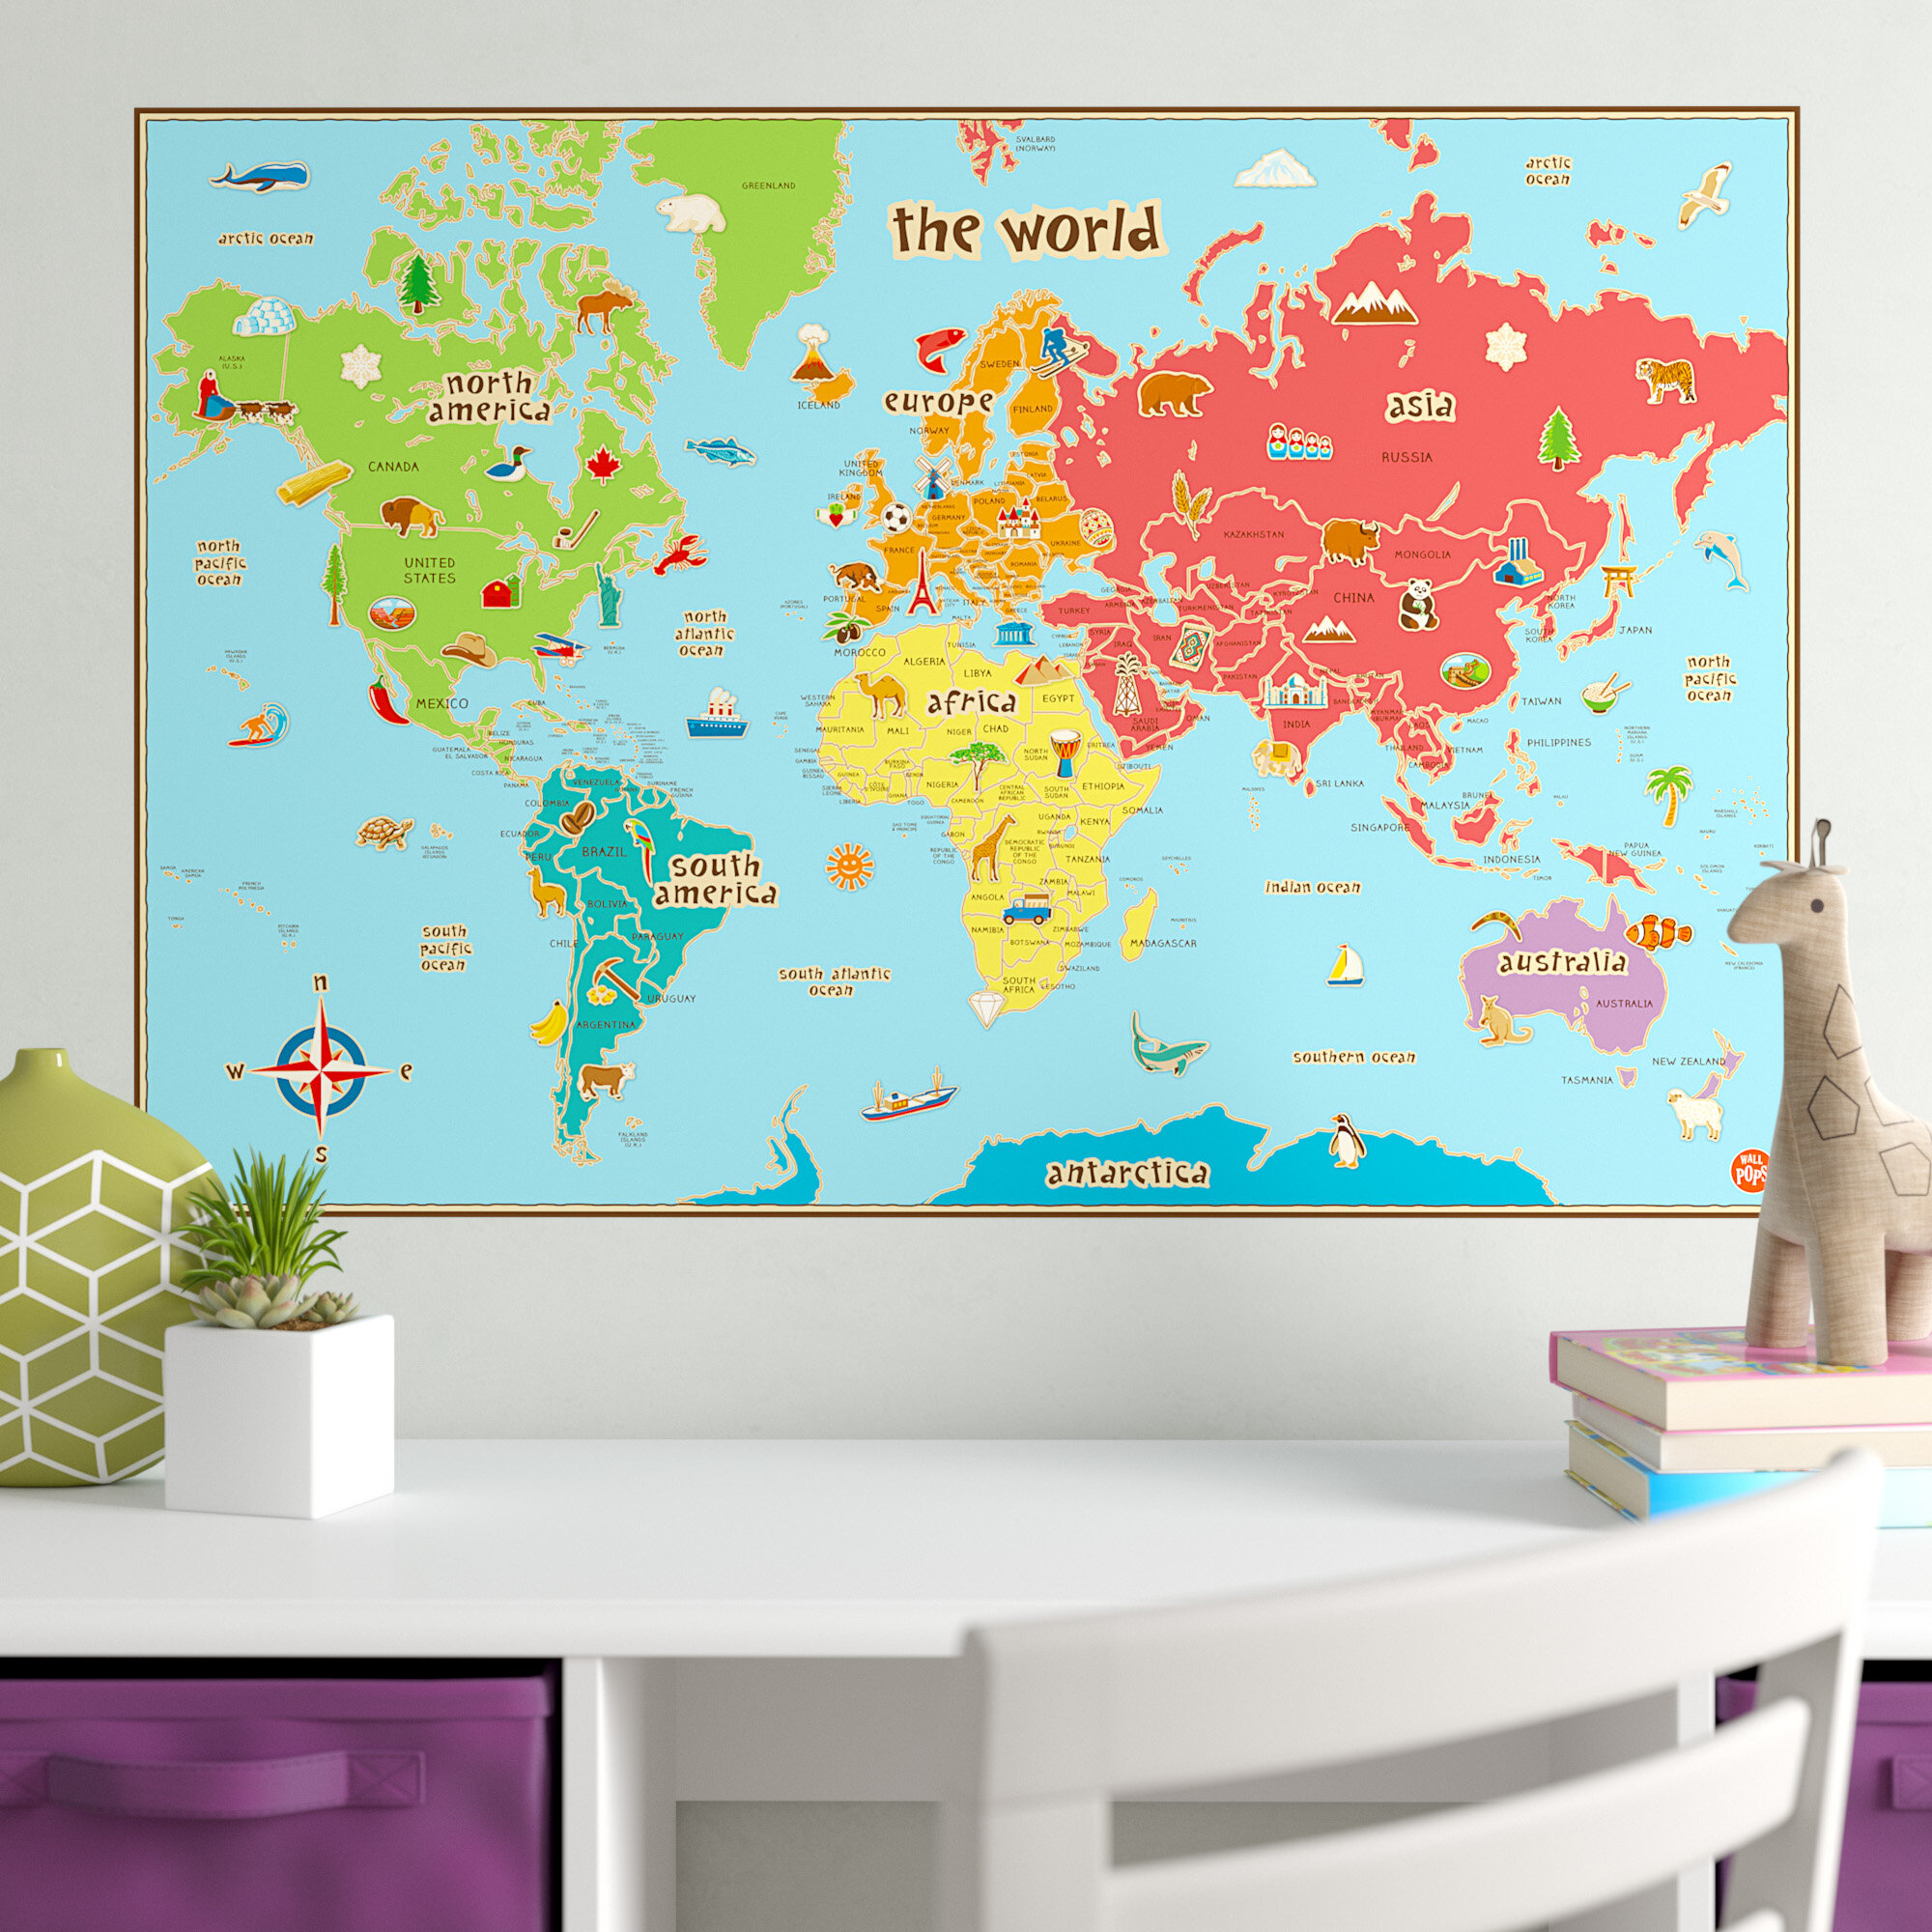 Black World Map Sticker Decal for Home Wall Decor Contemporary